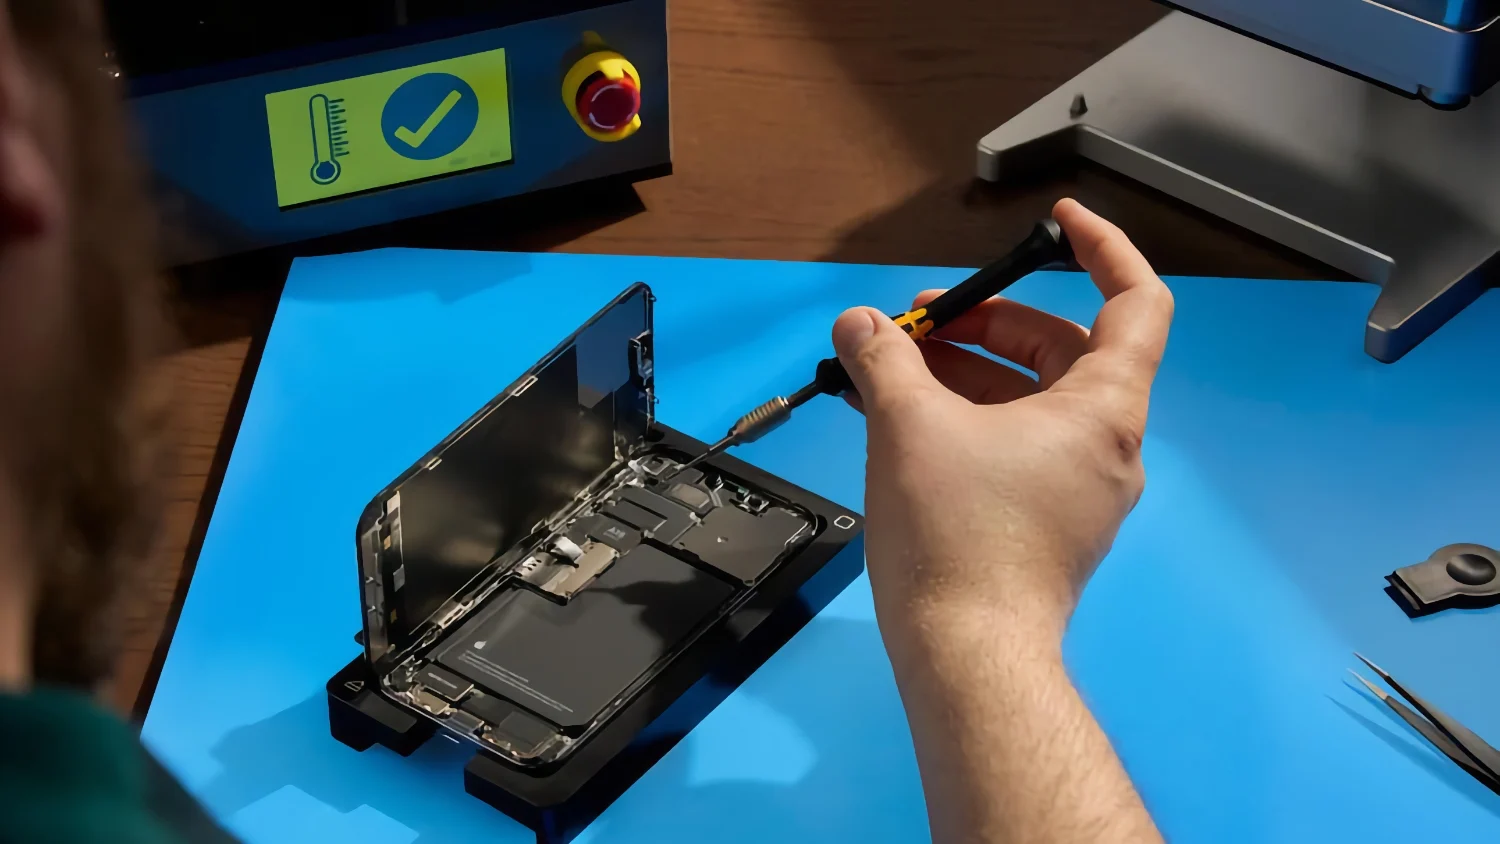 A person’s hand holding a tool, repairing an opened-up iPhone on a blue mat.